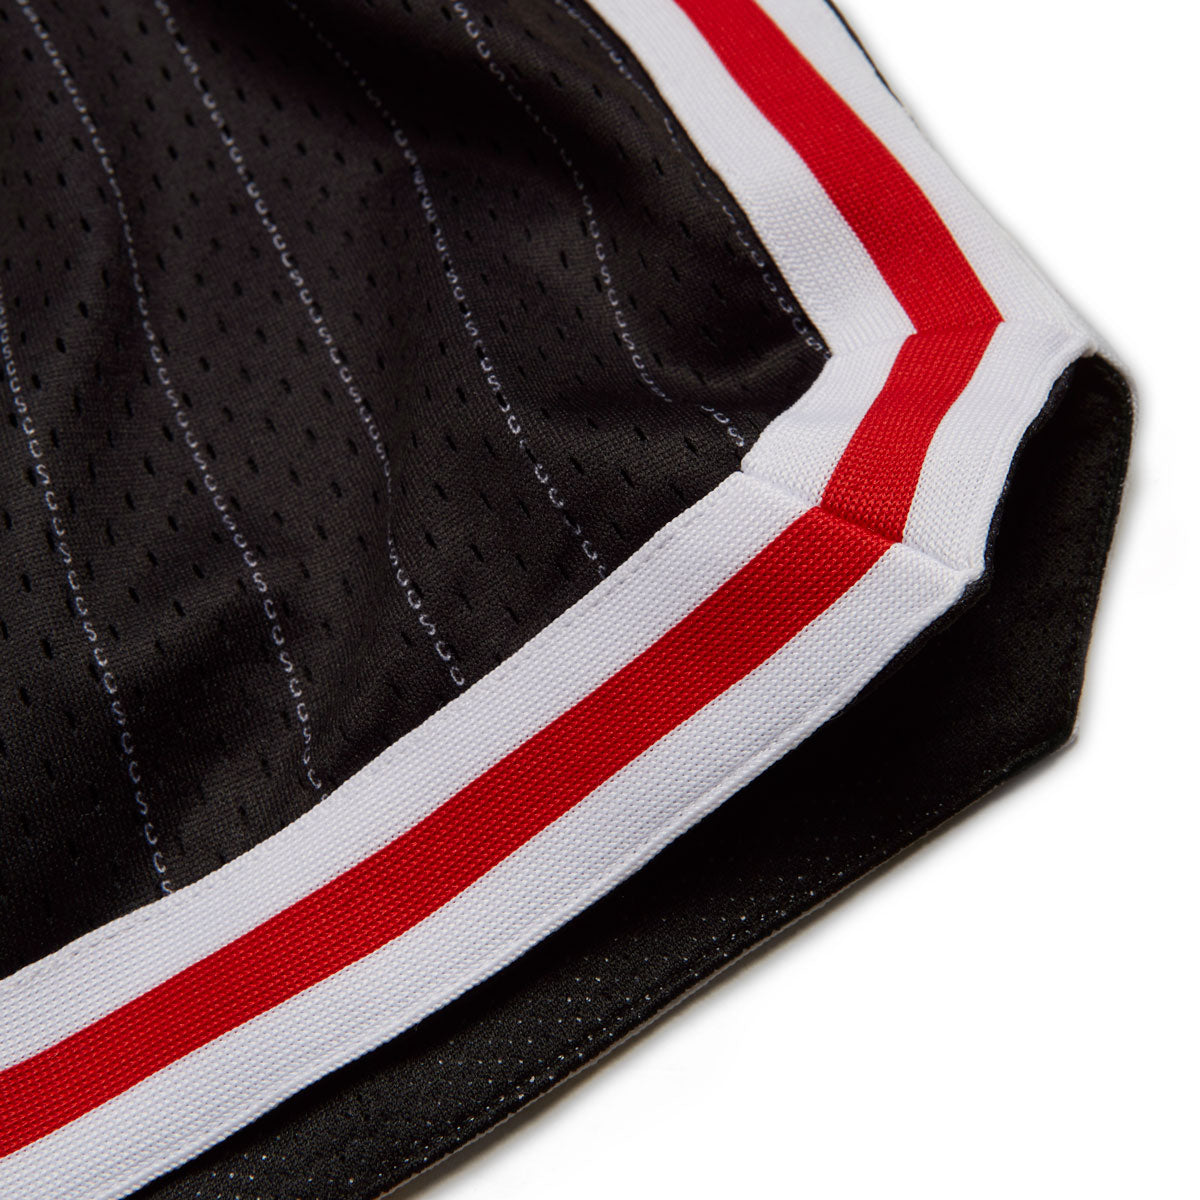 CCS Crossover Basketball Shorts - Black/Red